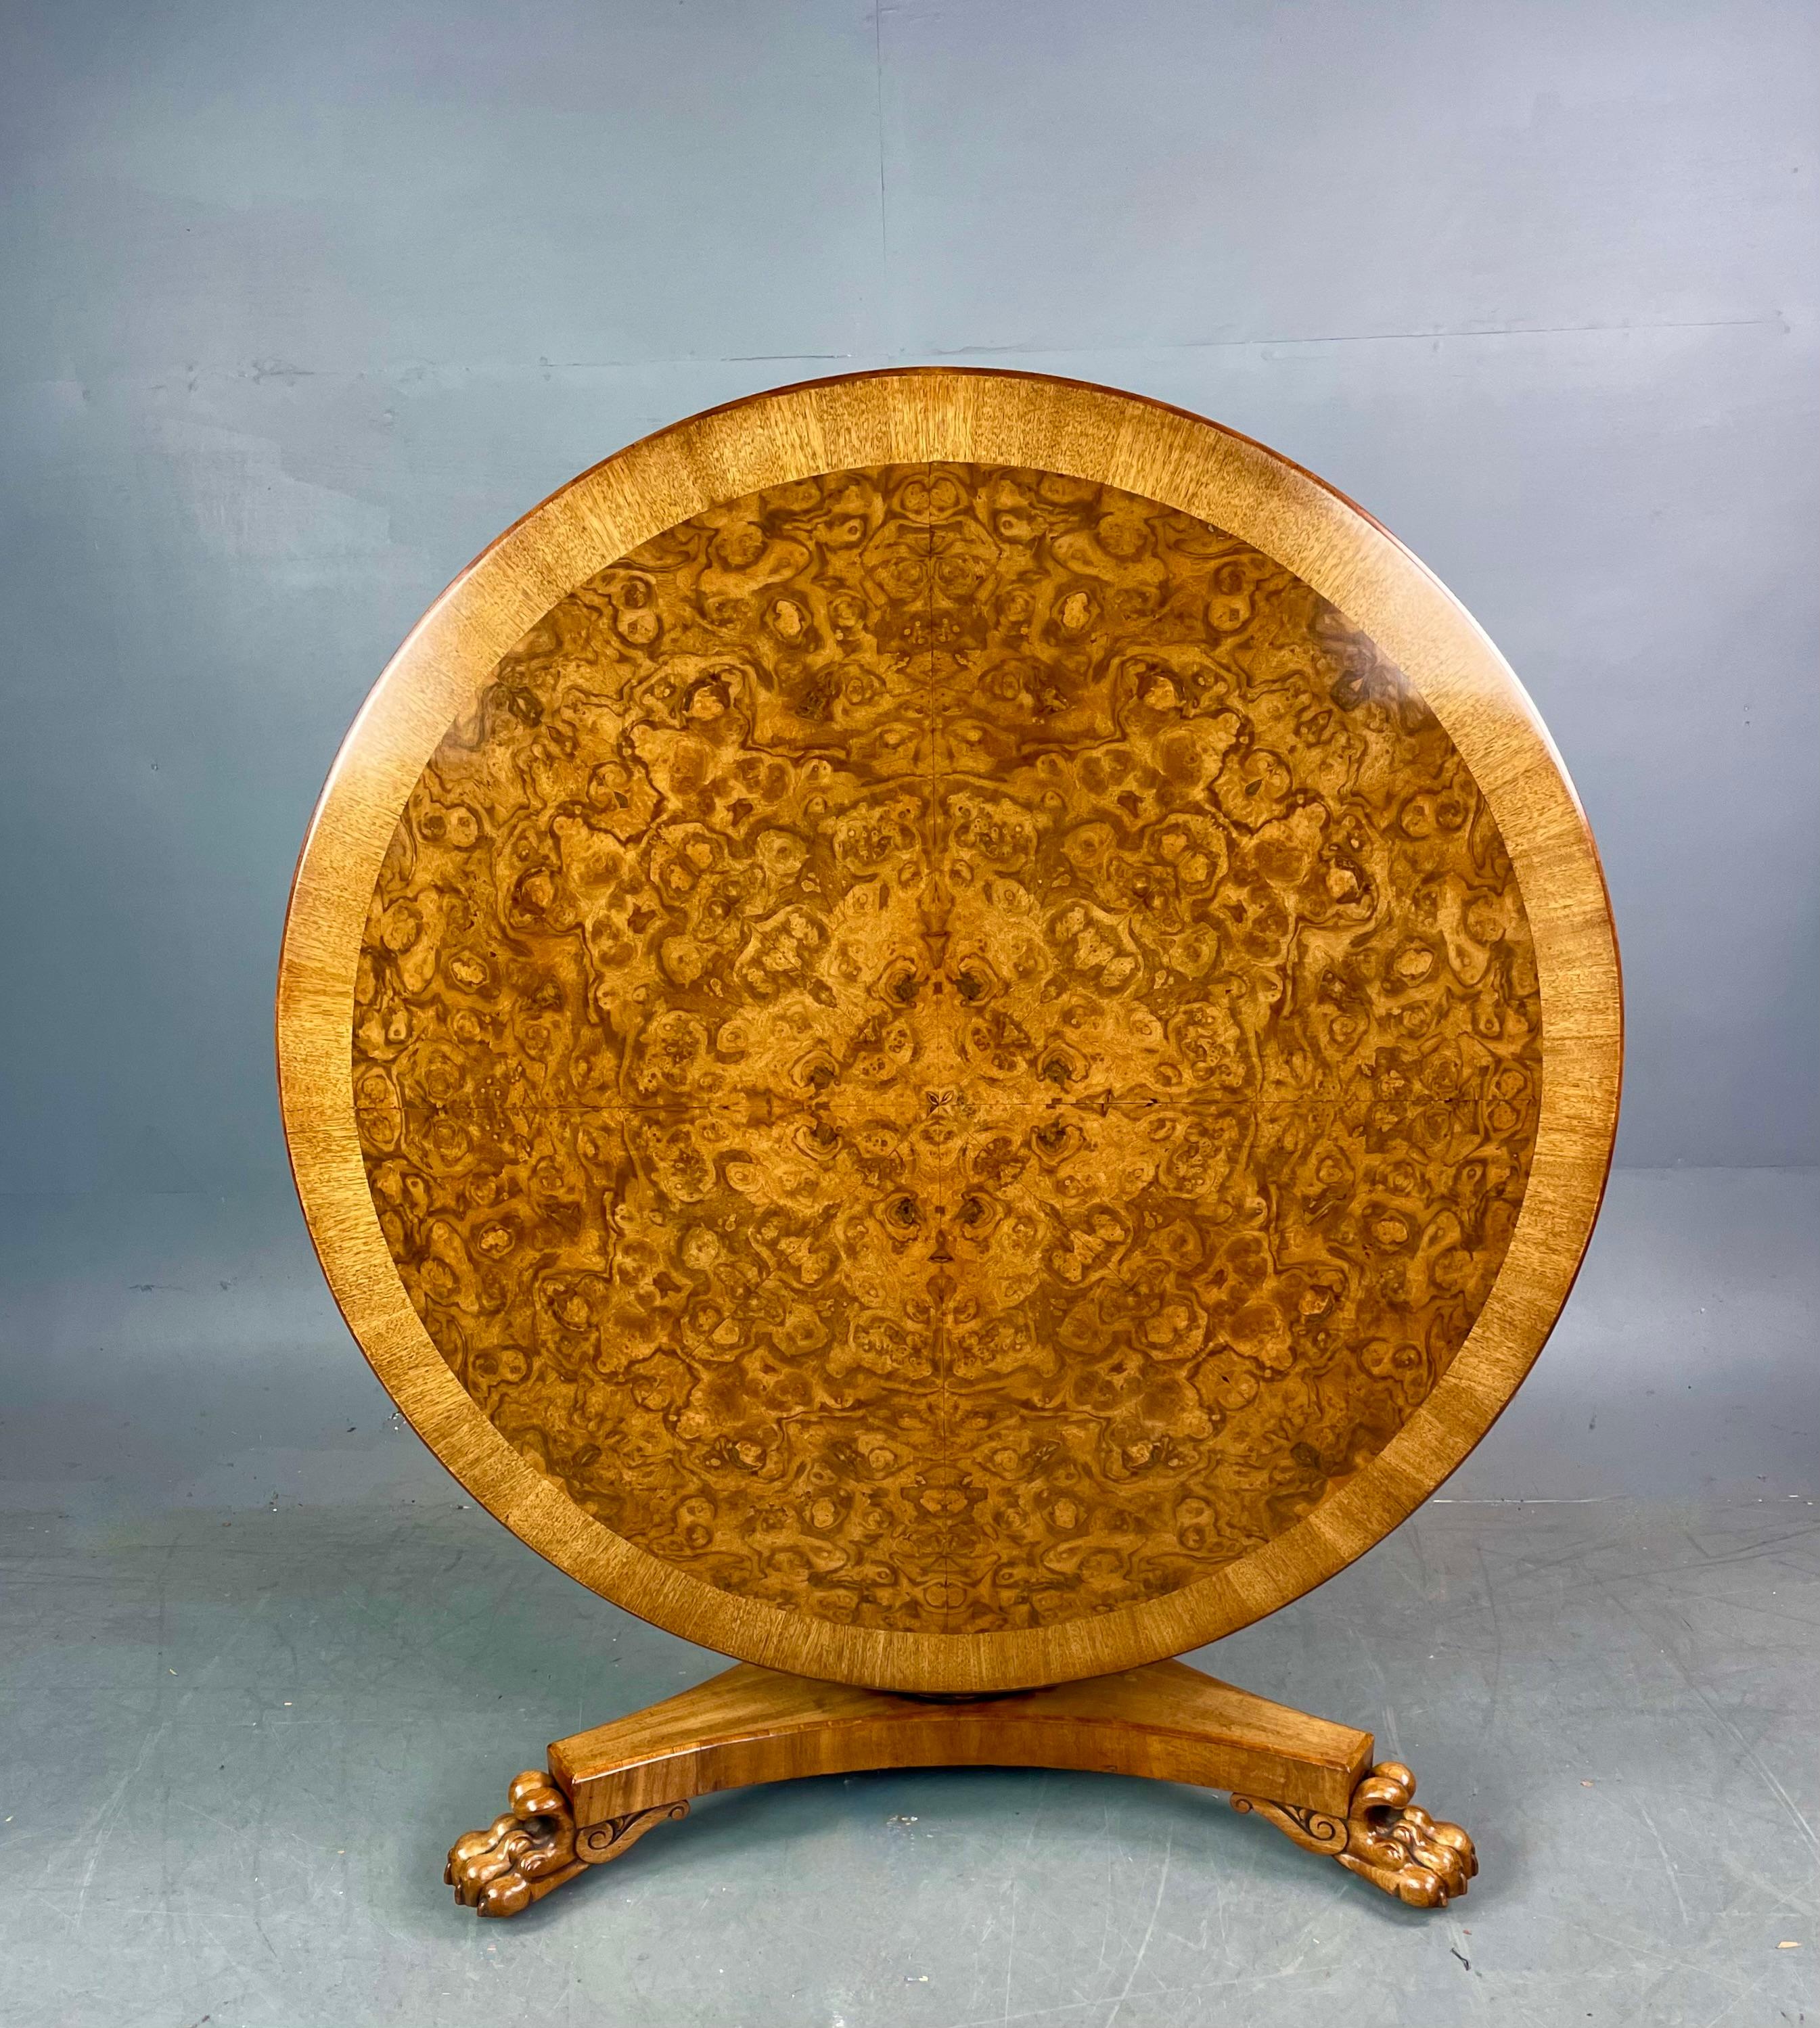 Fine quality William iv round burl walnut dining table circa 1830 .
The table has a fantastic figured walnut top with walnut cross banding ,it is a fantastic colour and in great un marked condition .That will seat six comfortably being 131 cm